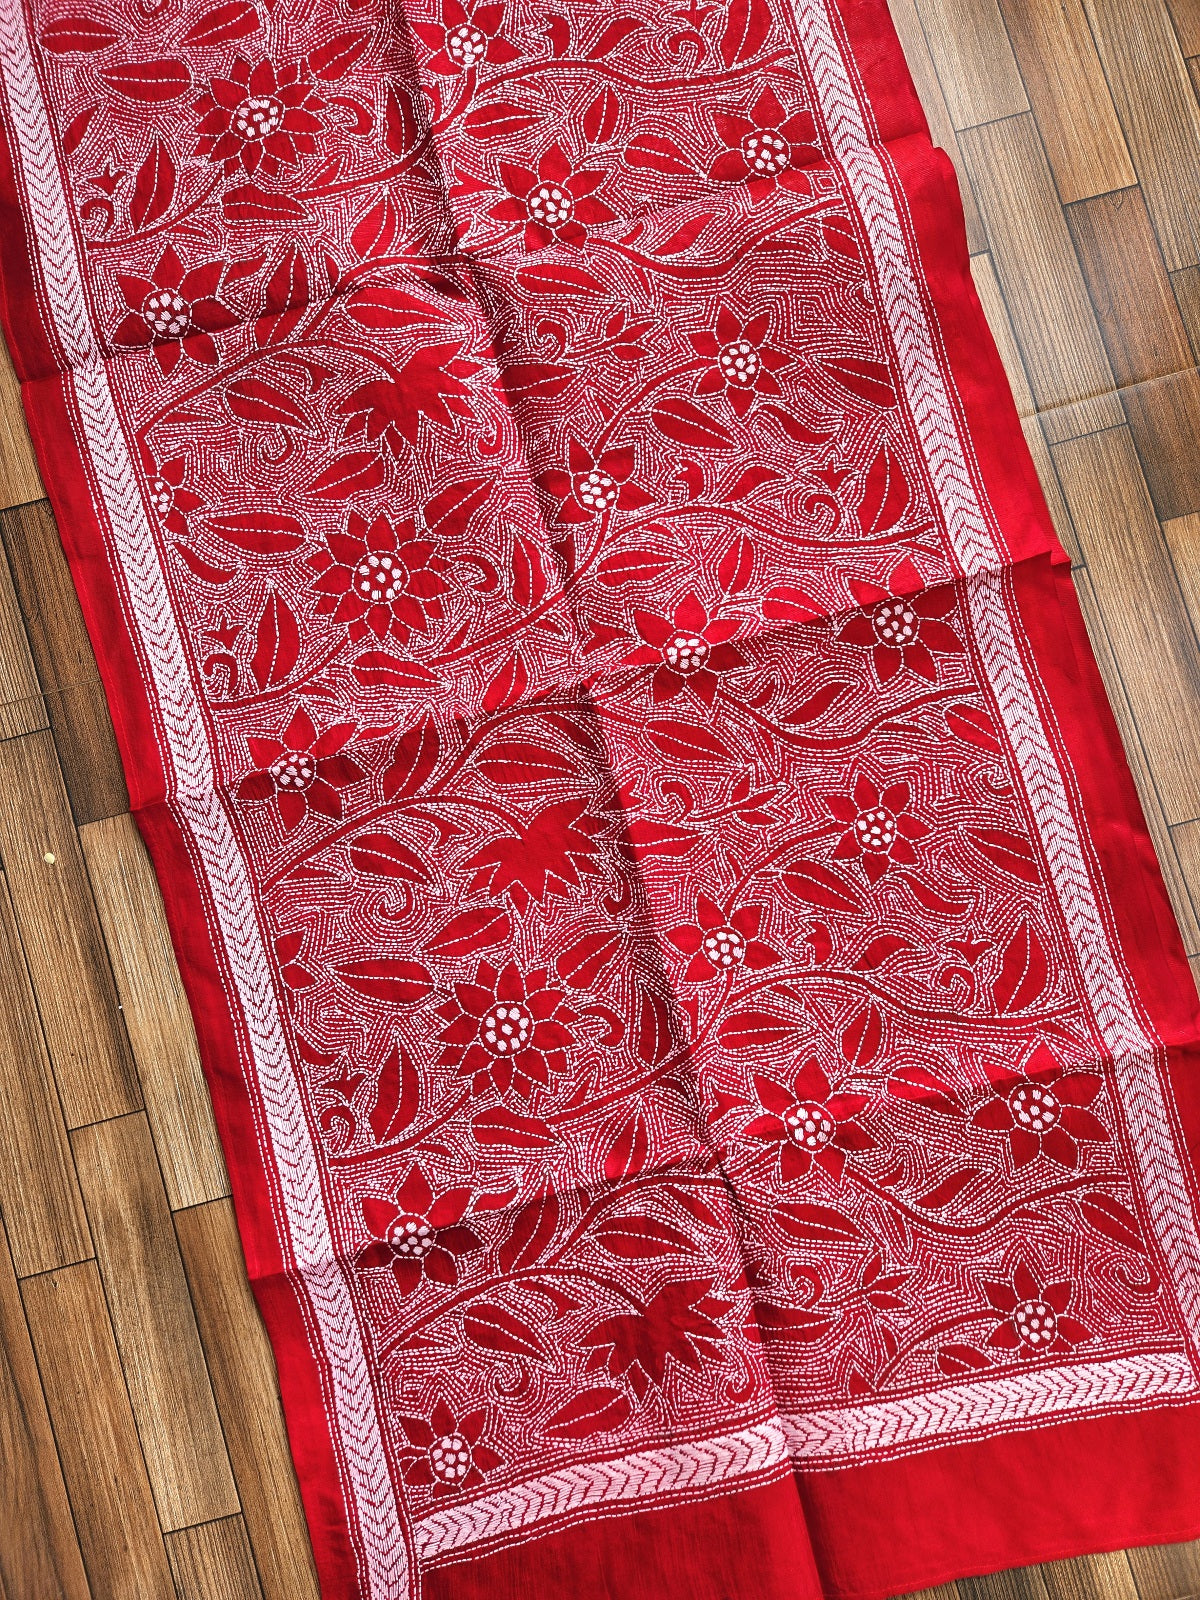 HAND EMBROIDERY STOLE naklshikantha flowers stole Indian gifts red